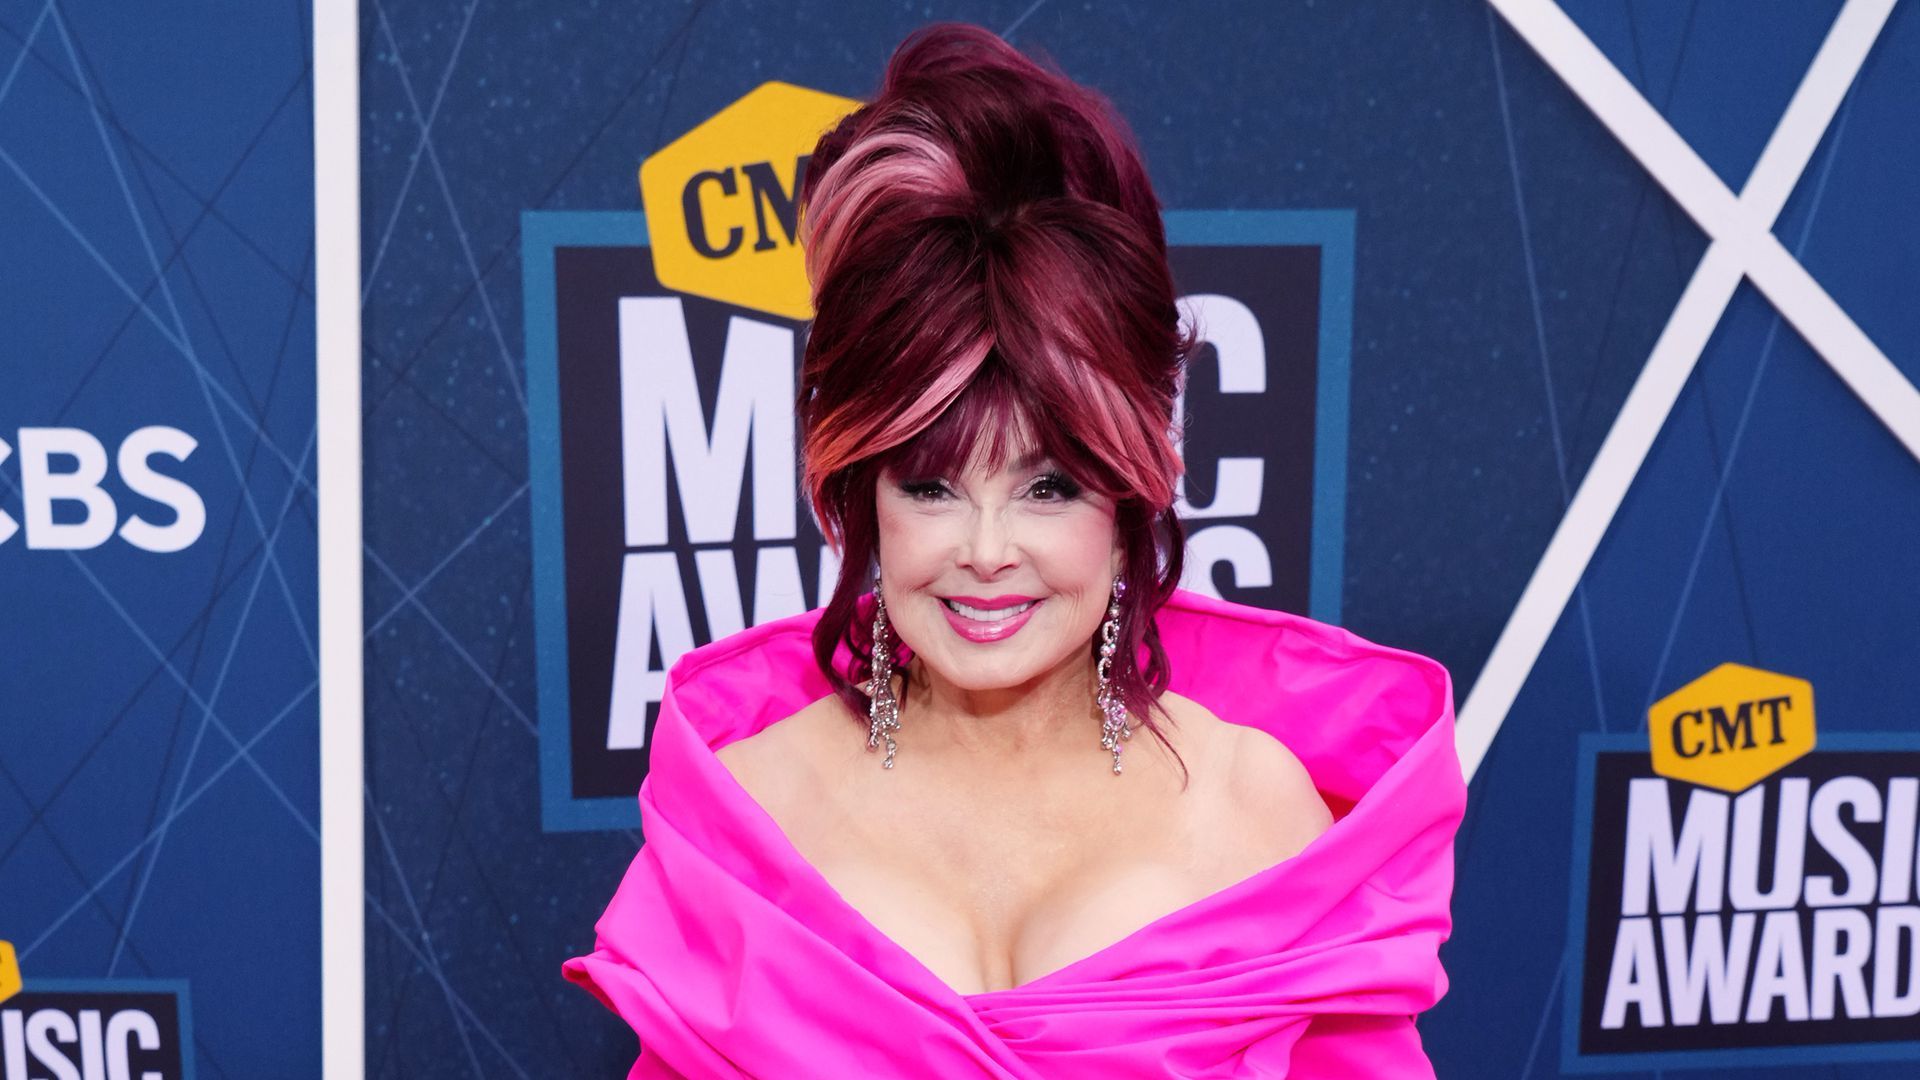 portrait of Naomi Judd with big hair and a pink dress in front of a sign that says "CMT Music awards"